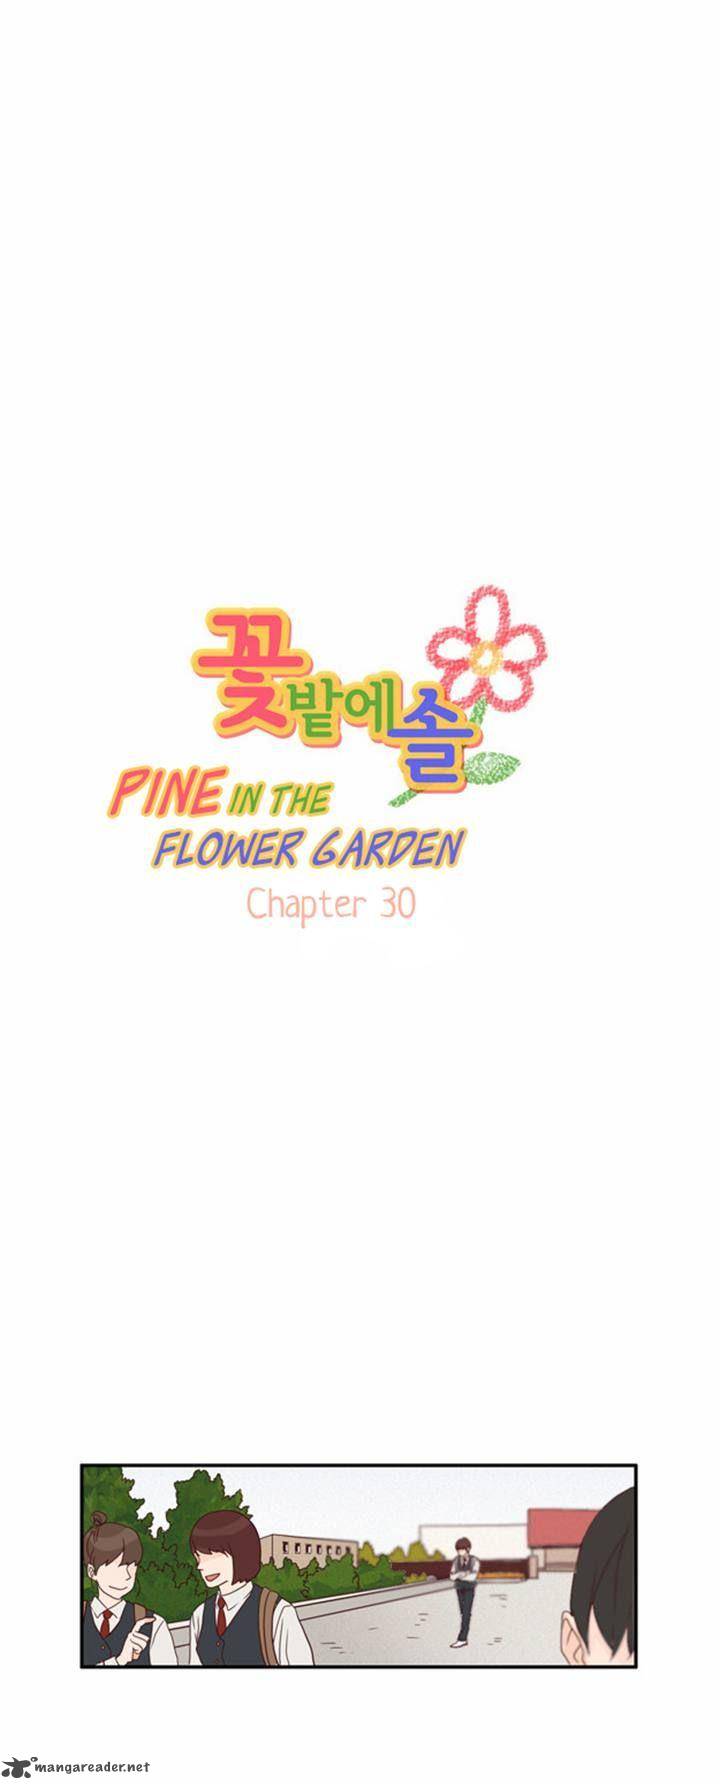 Pine In The Flower Garden Chapter 30 Page 1